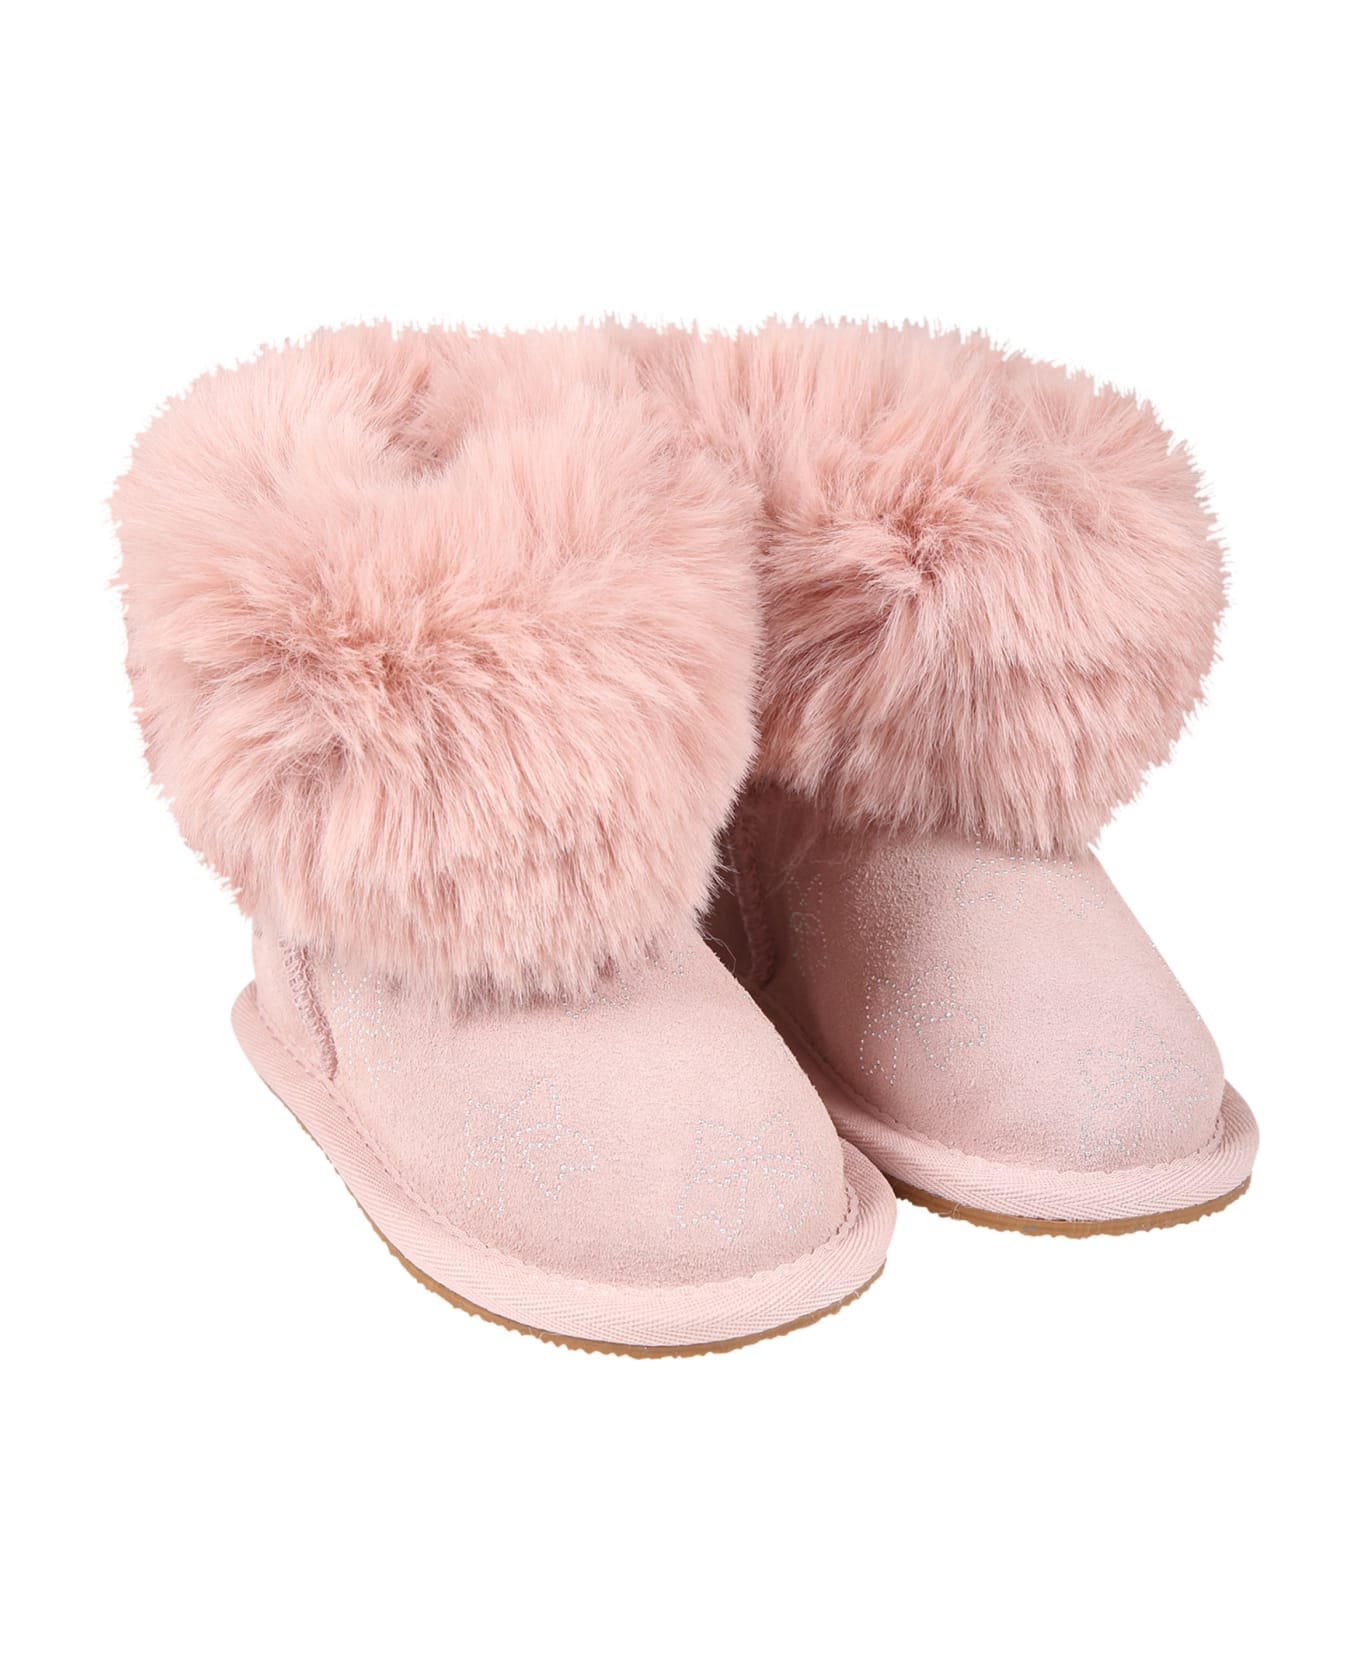 Monnalisa Pink Boots For Girl With Bows - Rosa Antico シューズ